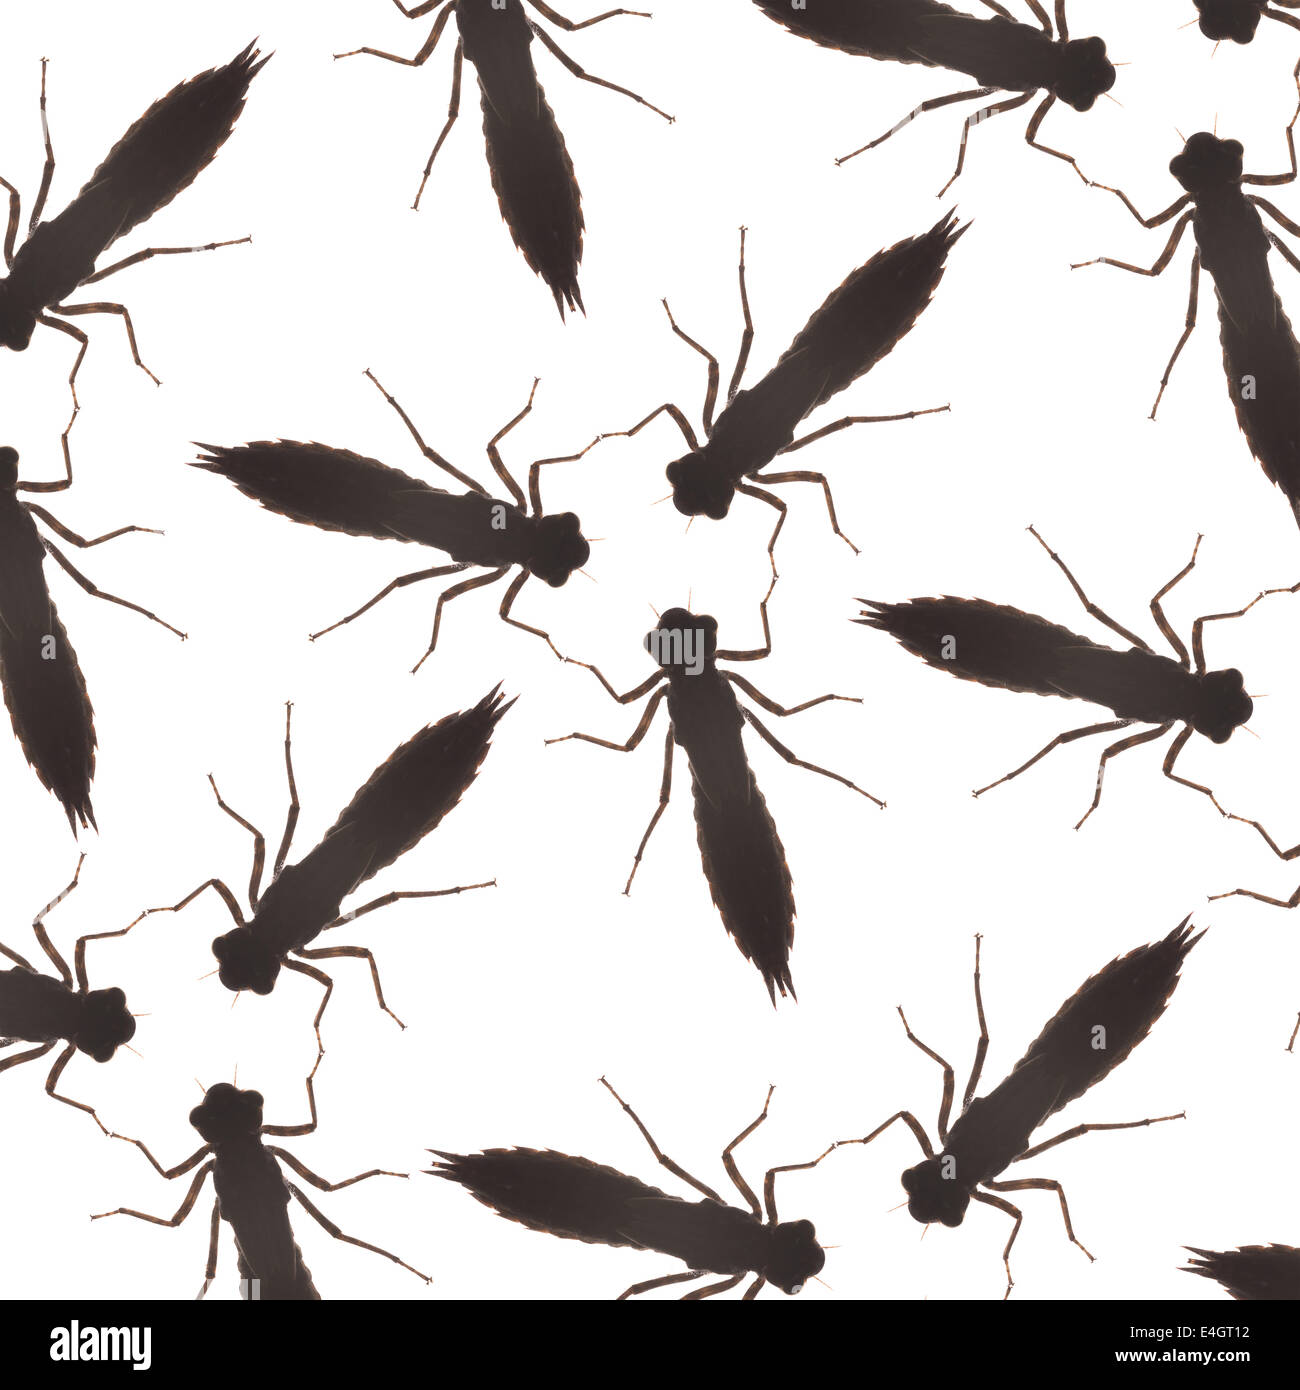 Scary and afraid phobia of insects pattern made by dragonfly larvae outline silhouette of mature nymph Stock Photo